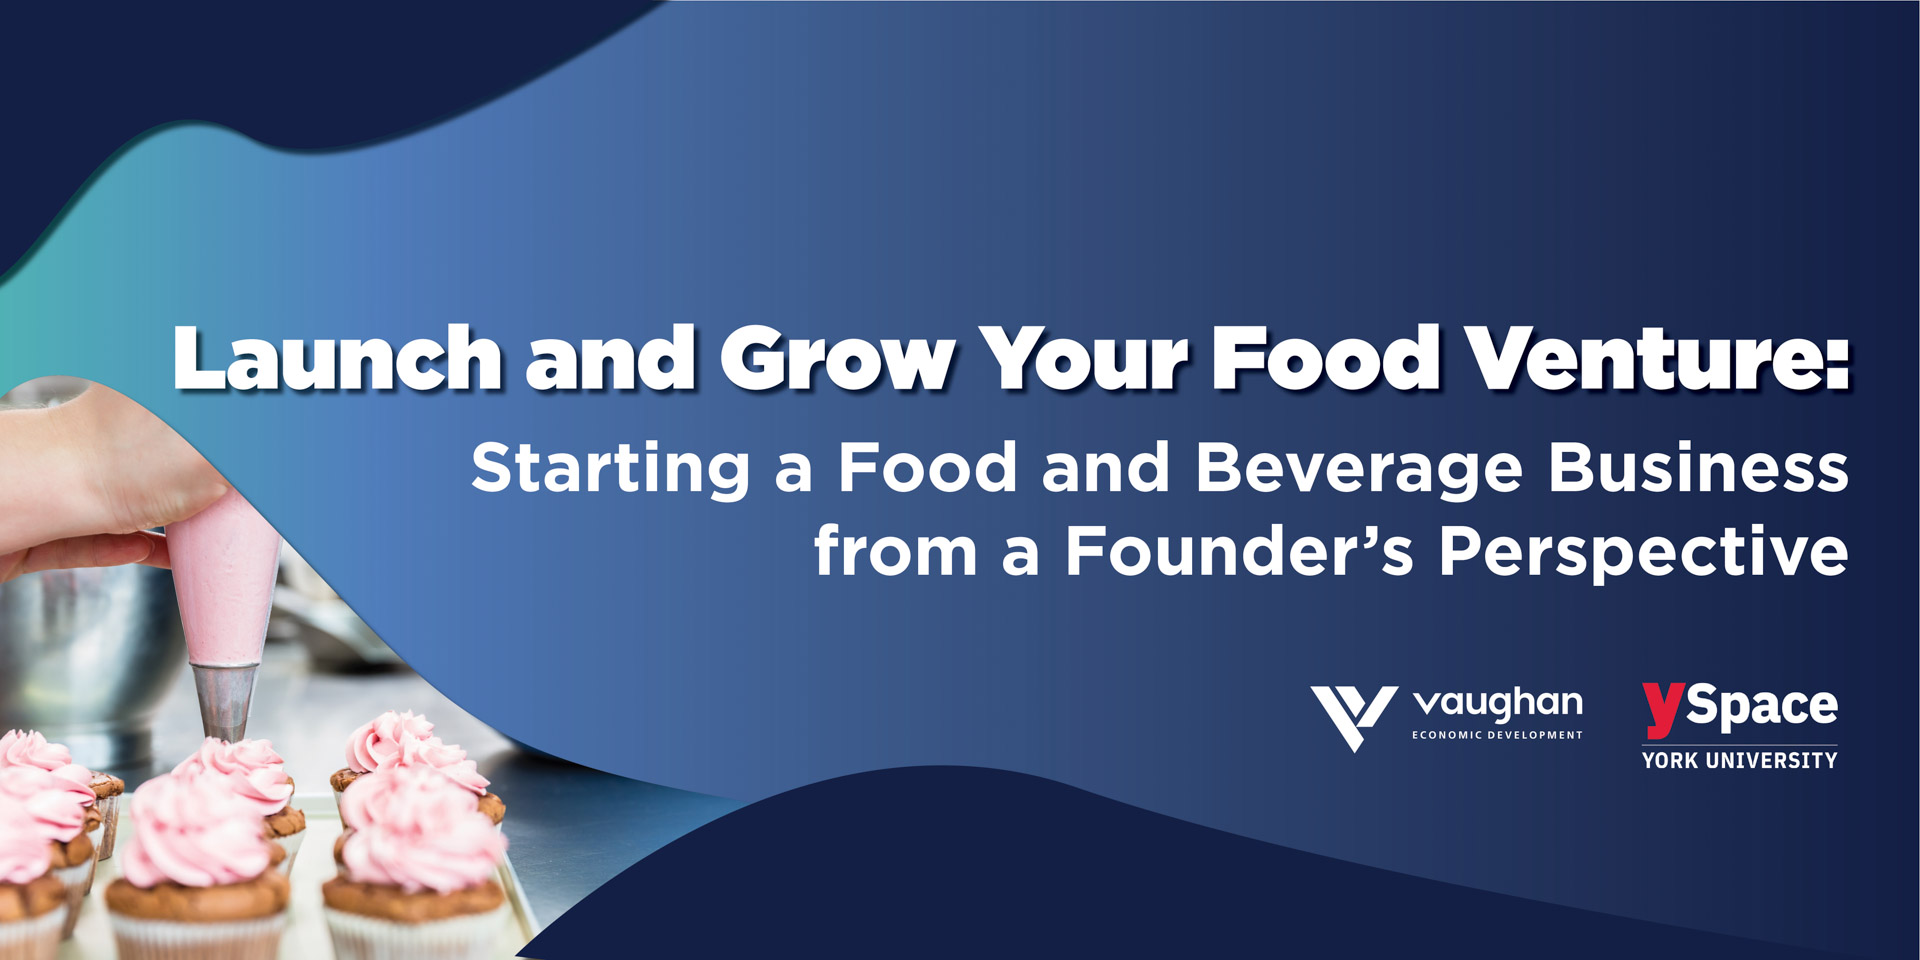 Food-Beverage-and-Technology-sector _Webinar_CPV